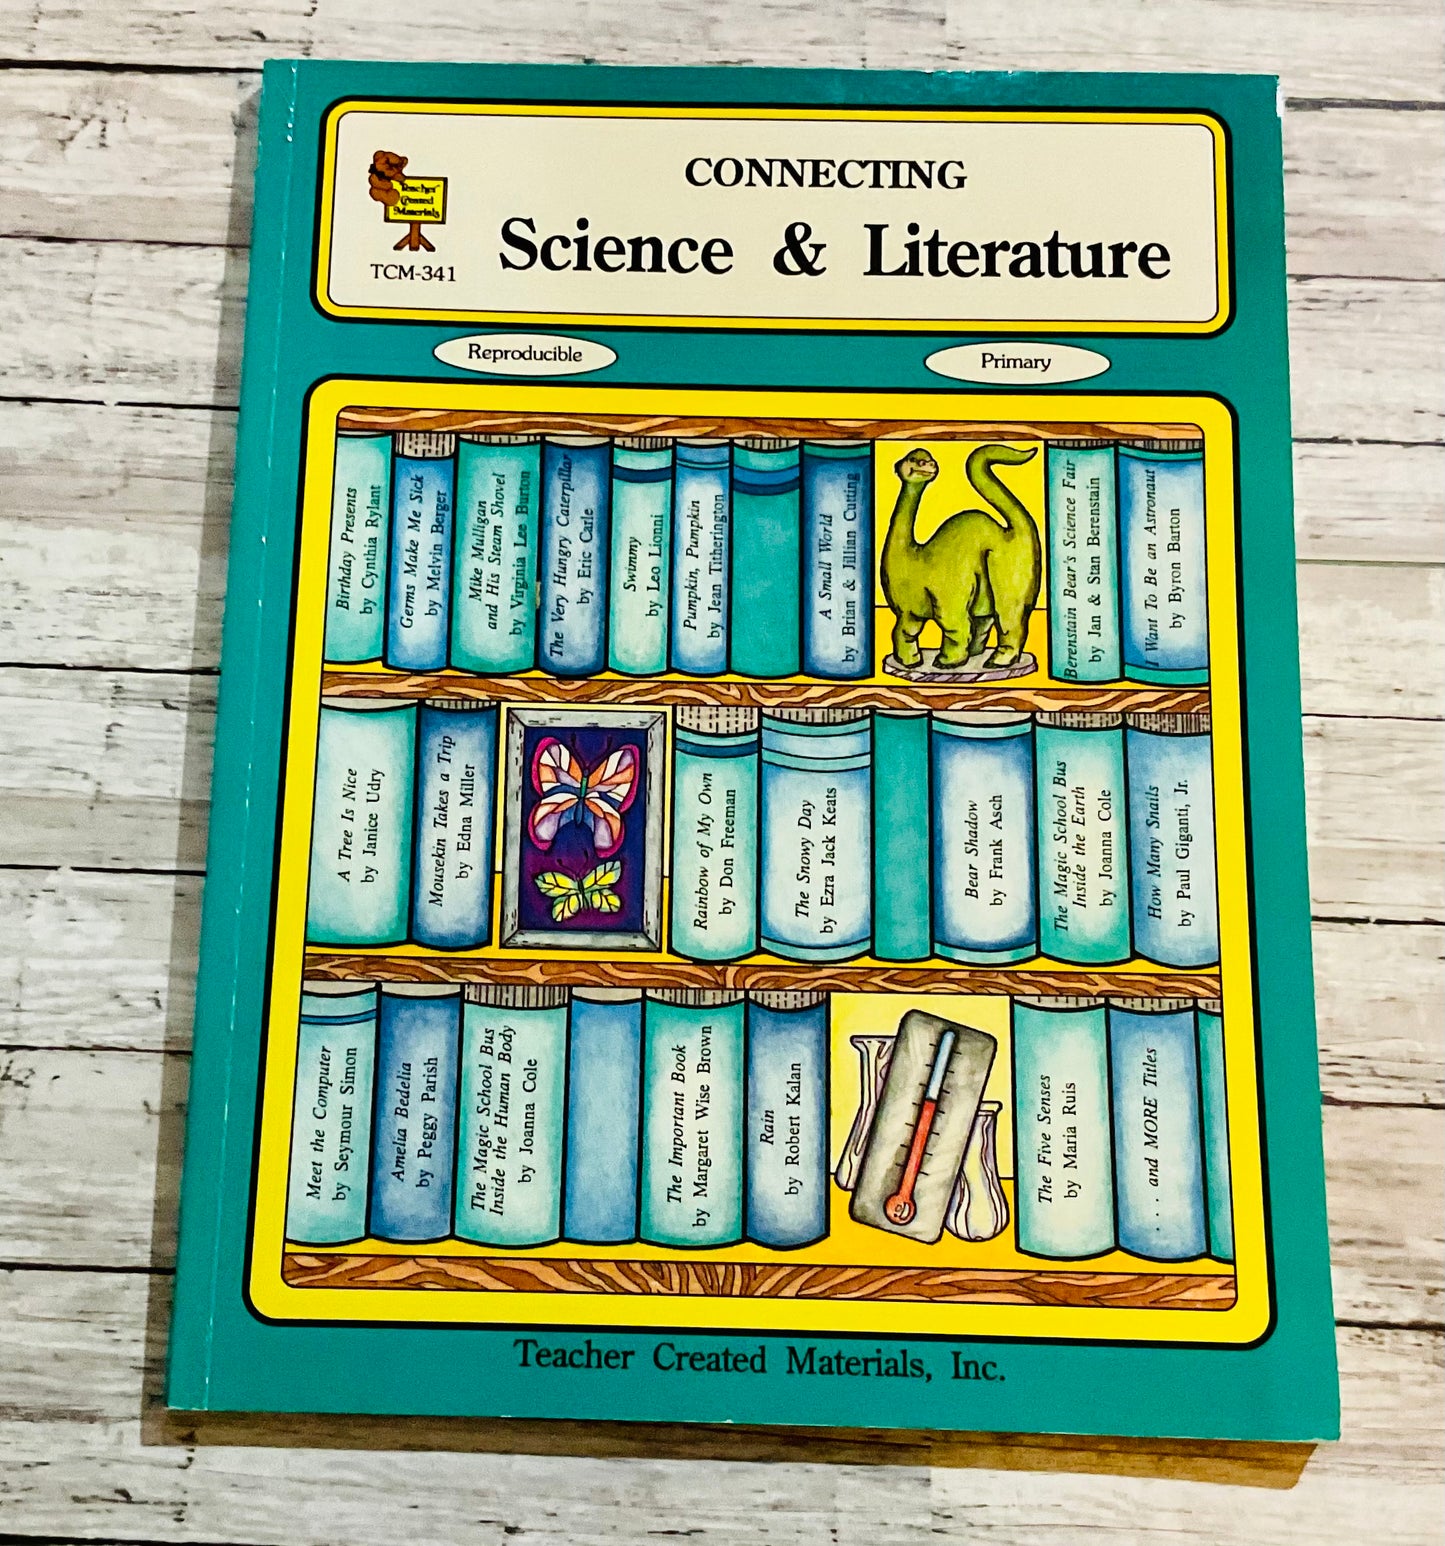 Connecting Science & Literature TCM-341 - Anchored Homeschool Resource Center